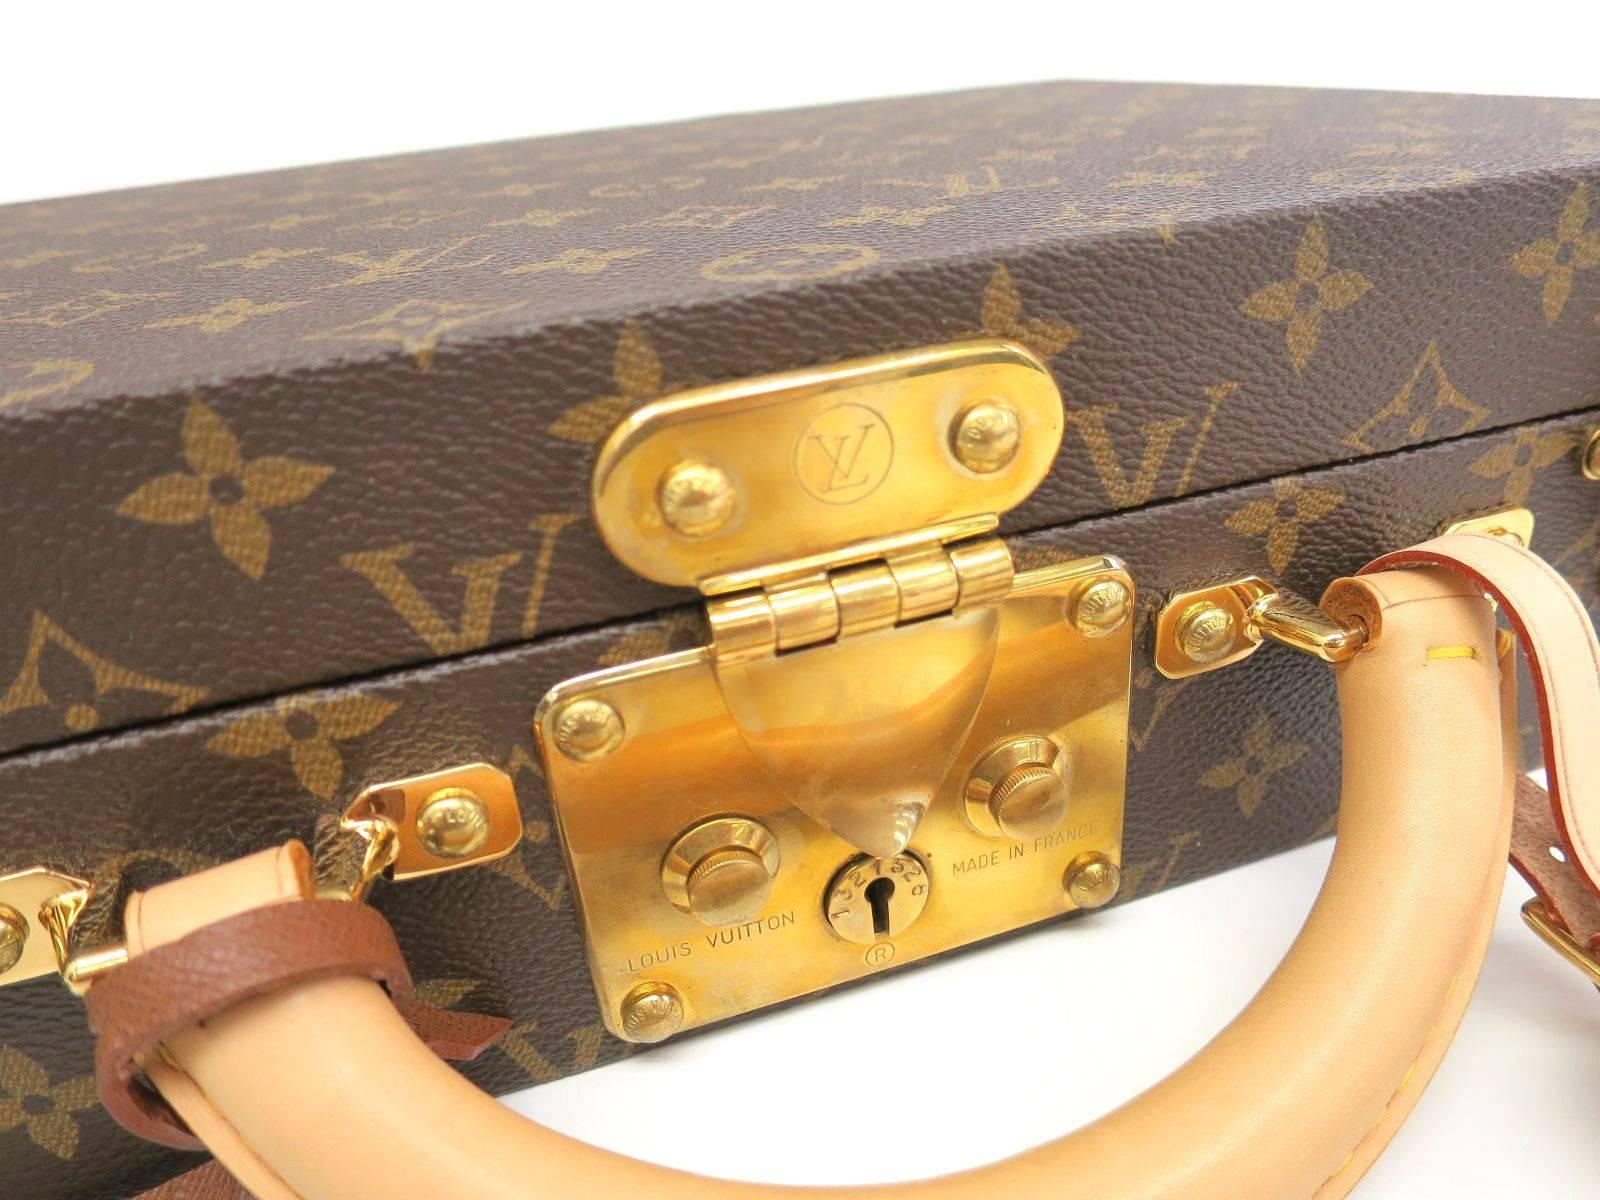 CURATOR'S NOTES

Jewels beget jewels.  Rare Louis Vuitton Boite Bijoux jewelry box carrying case with all original accessories.  Don't miss your opportunity to add this hard-to-find piece to your Louis Vuitton collection.

Retail price